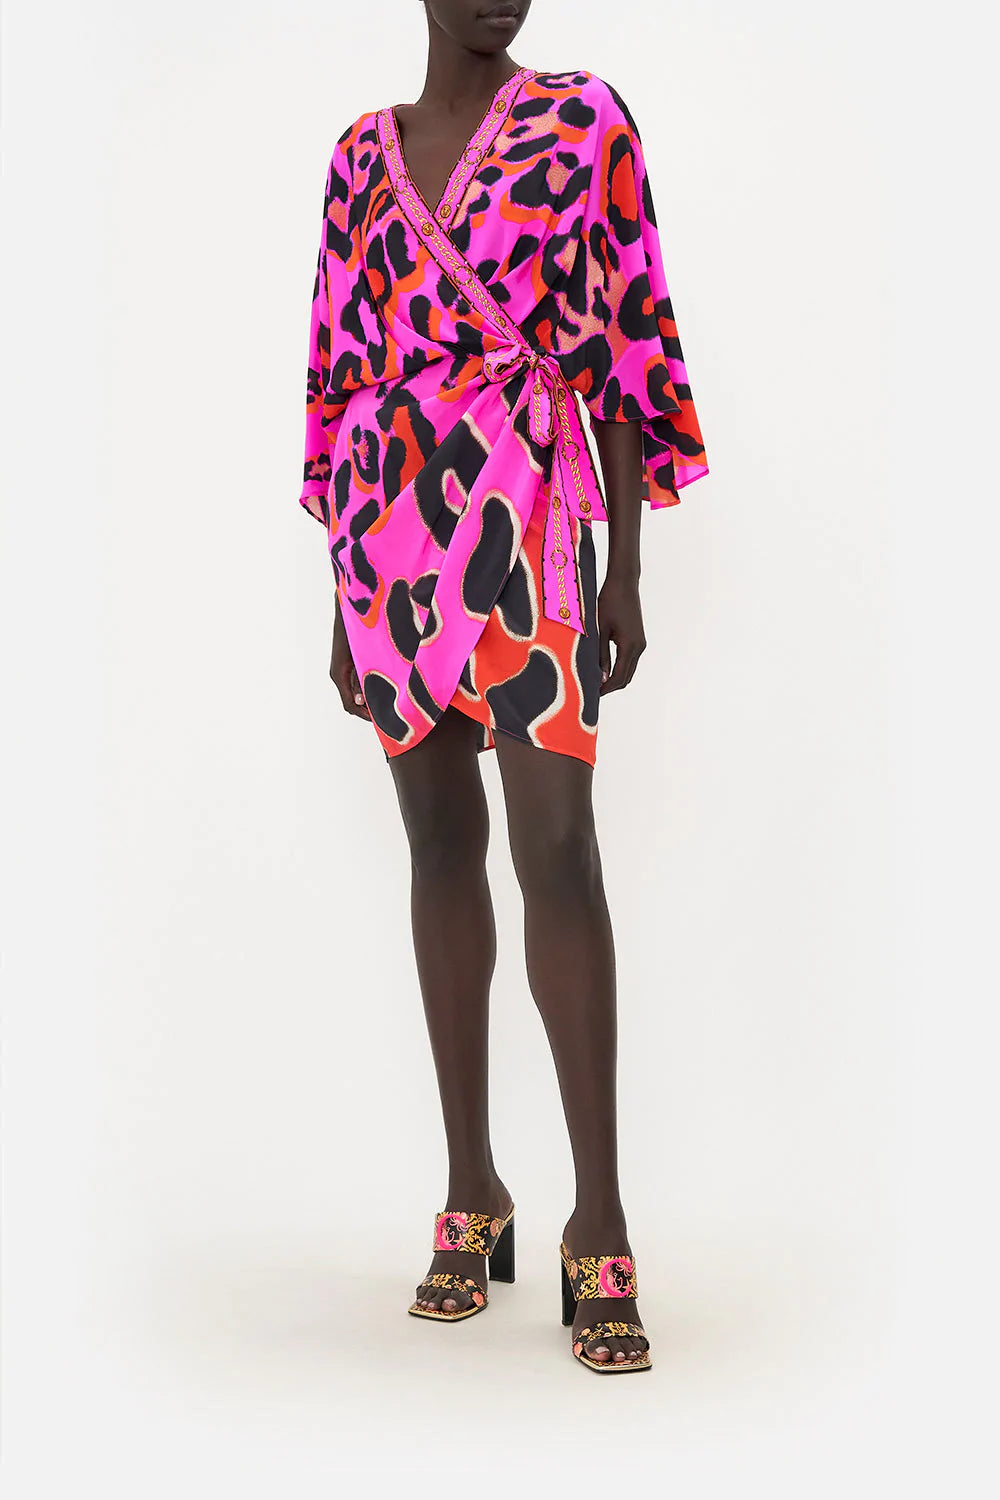 Camilla Always Change Your Spots Draped Front Wrap Dress